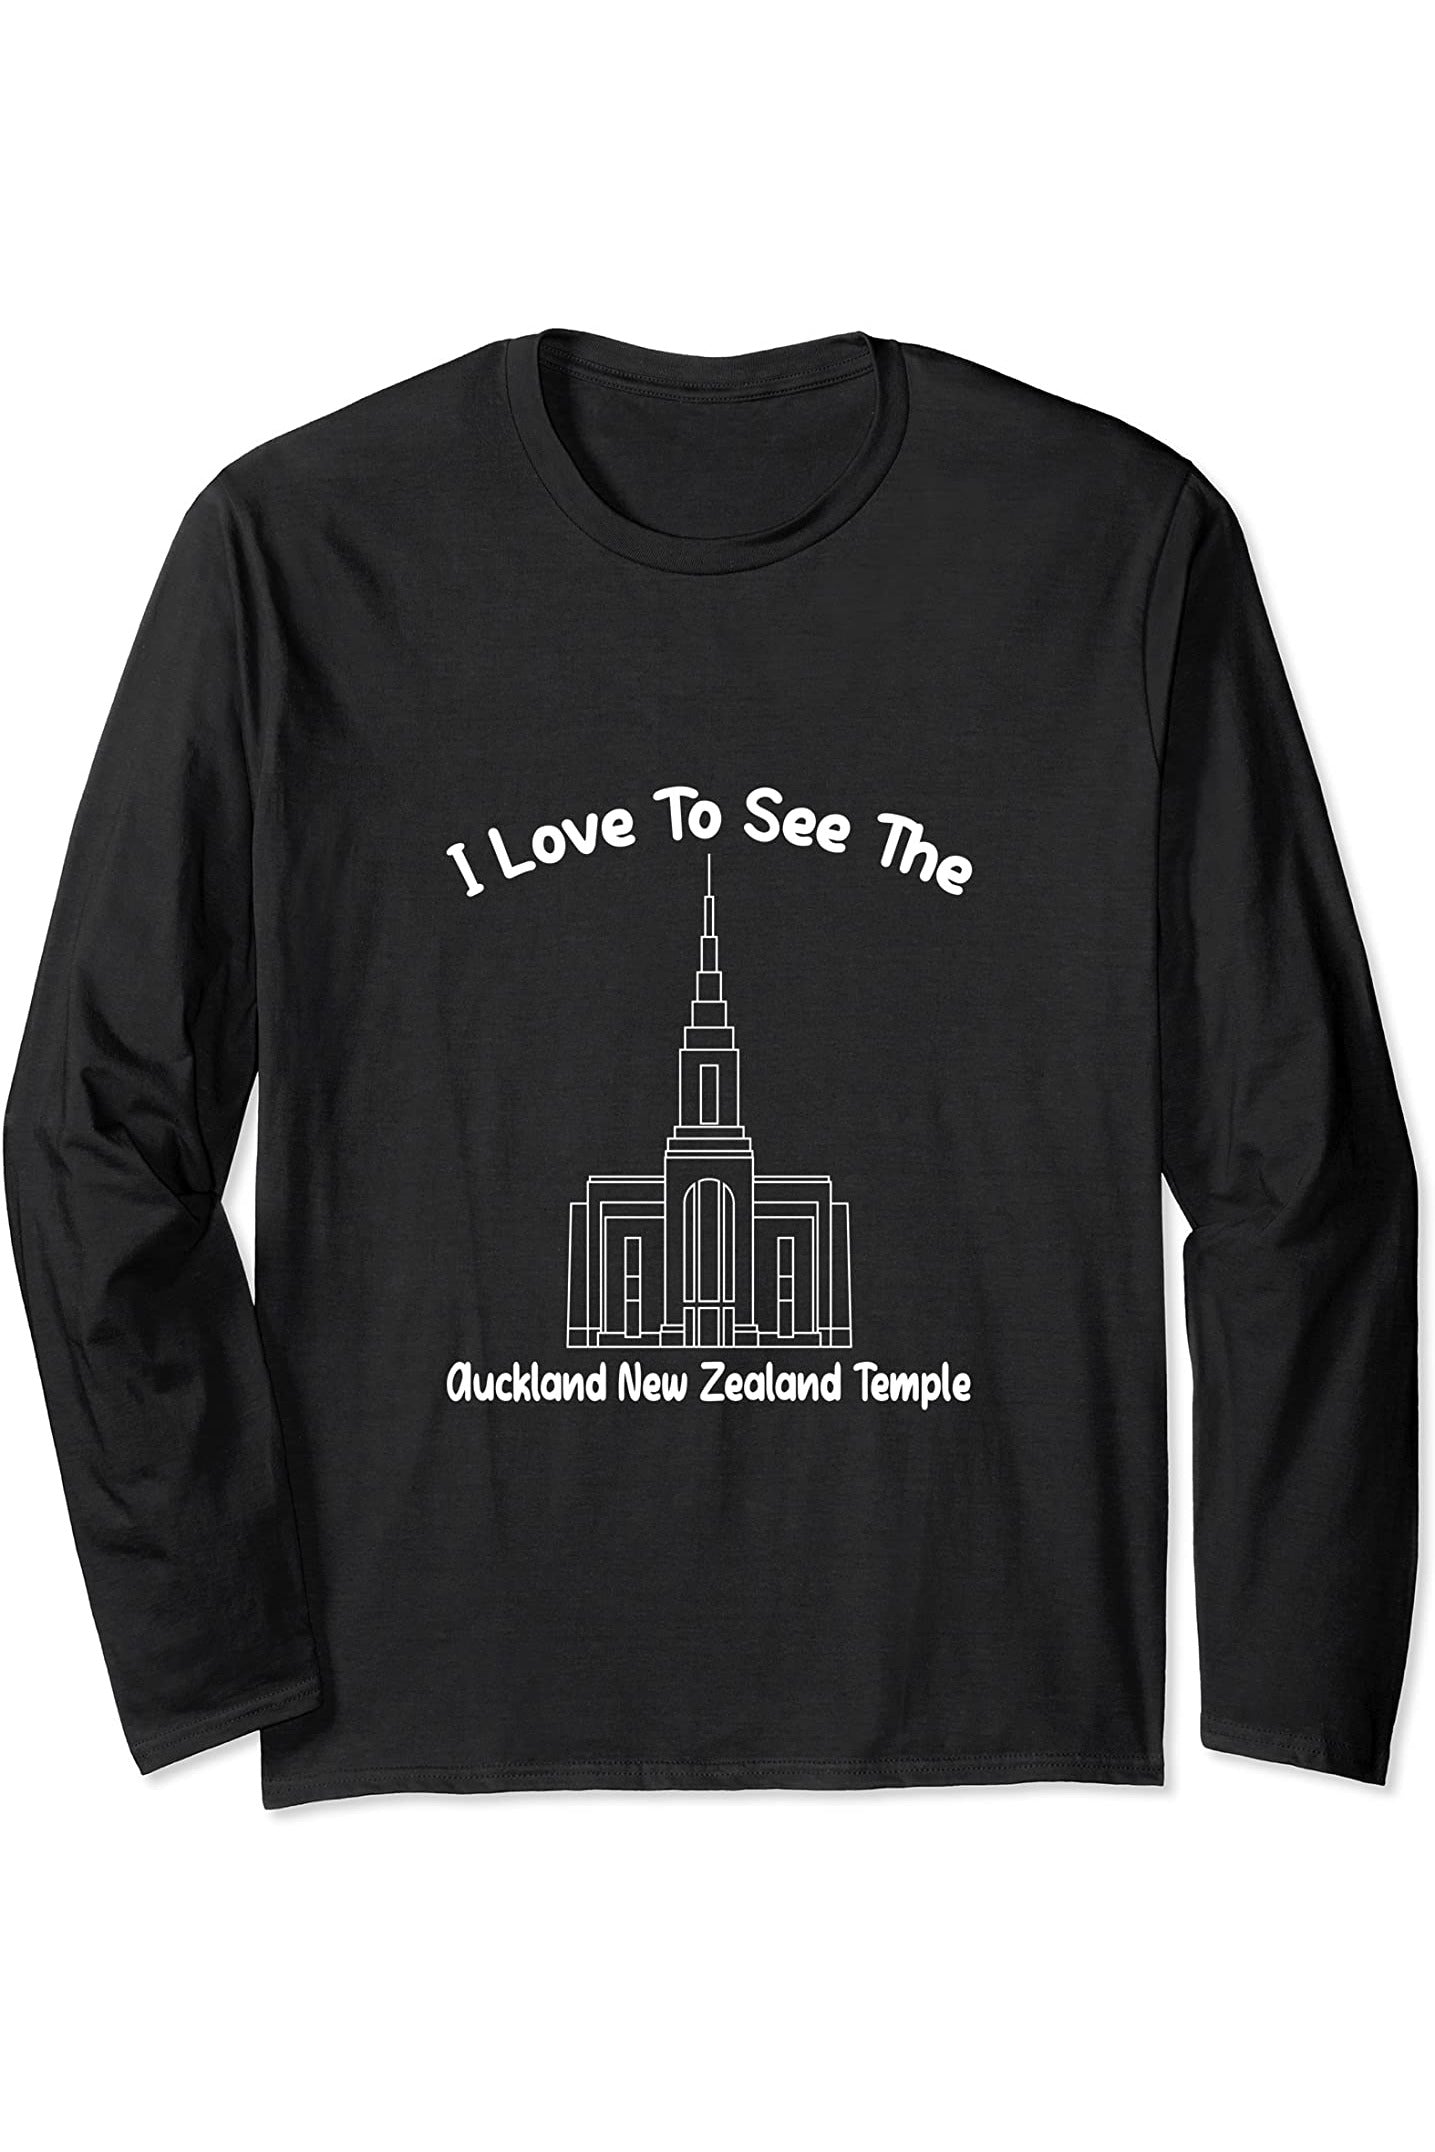 Auckland New Zealand Temple Long Sleeve T-Shirt - Primary Style (English) US